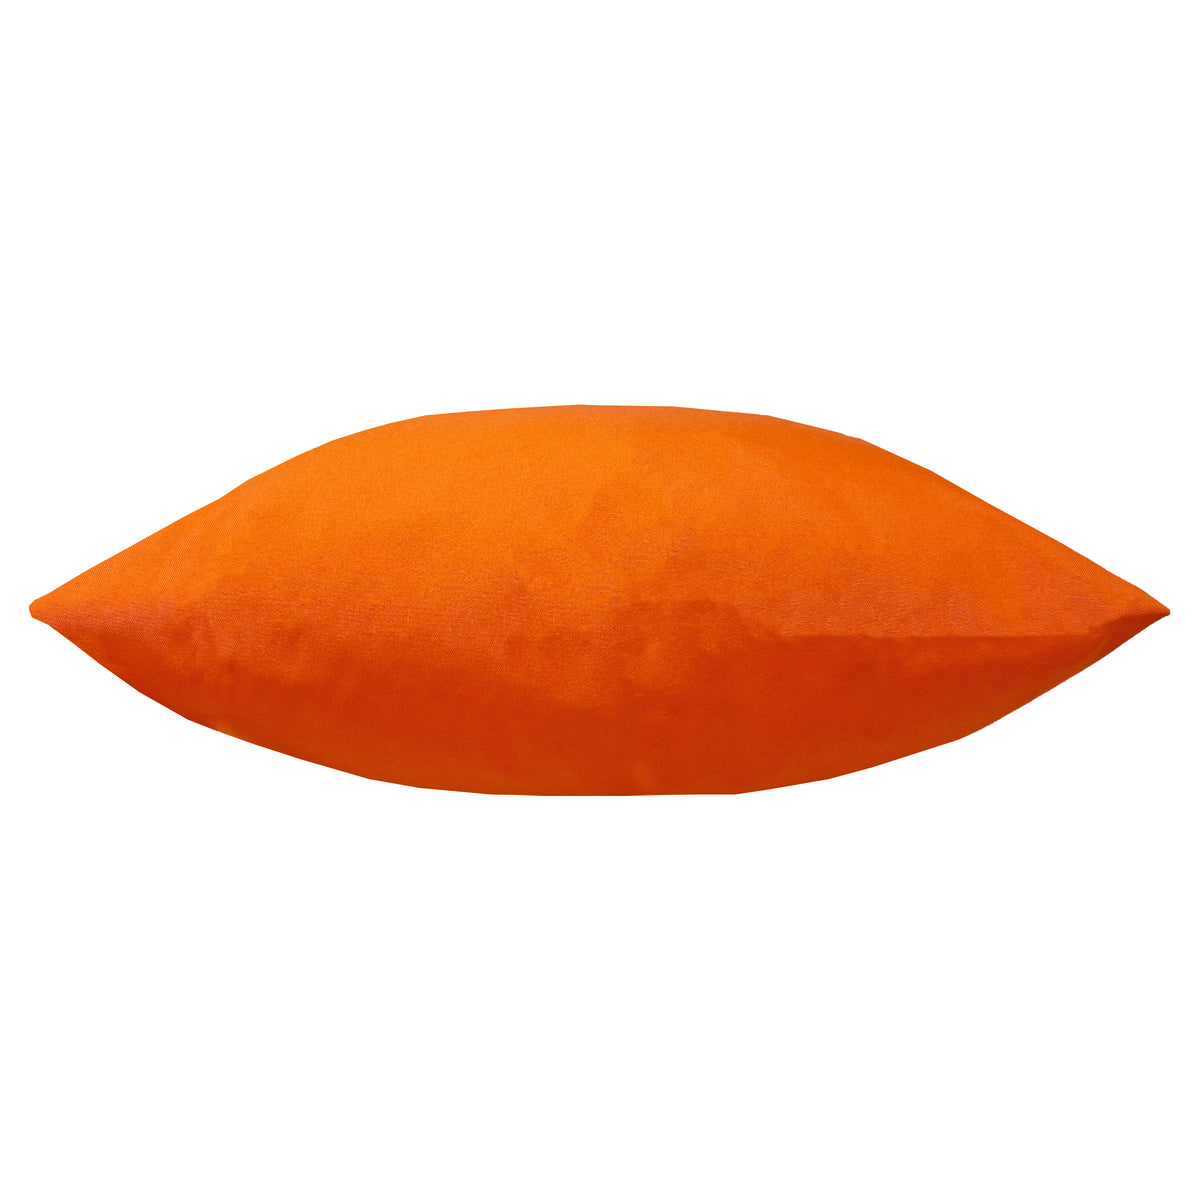 Wrap 43X43 Outdoor Polyester Cushion Orange 2 Pack